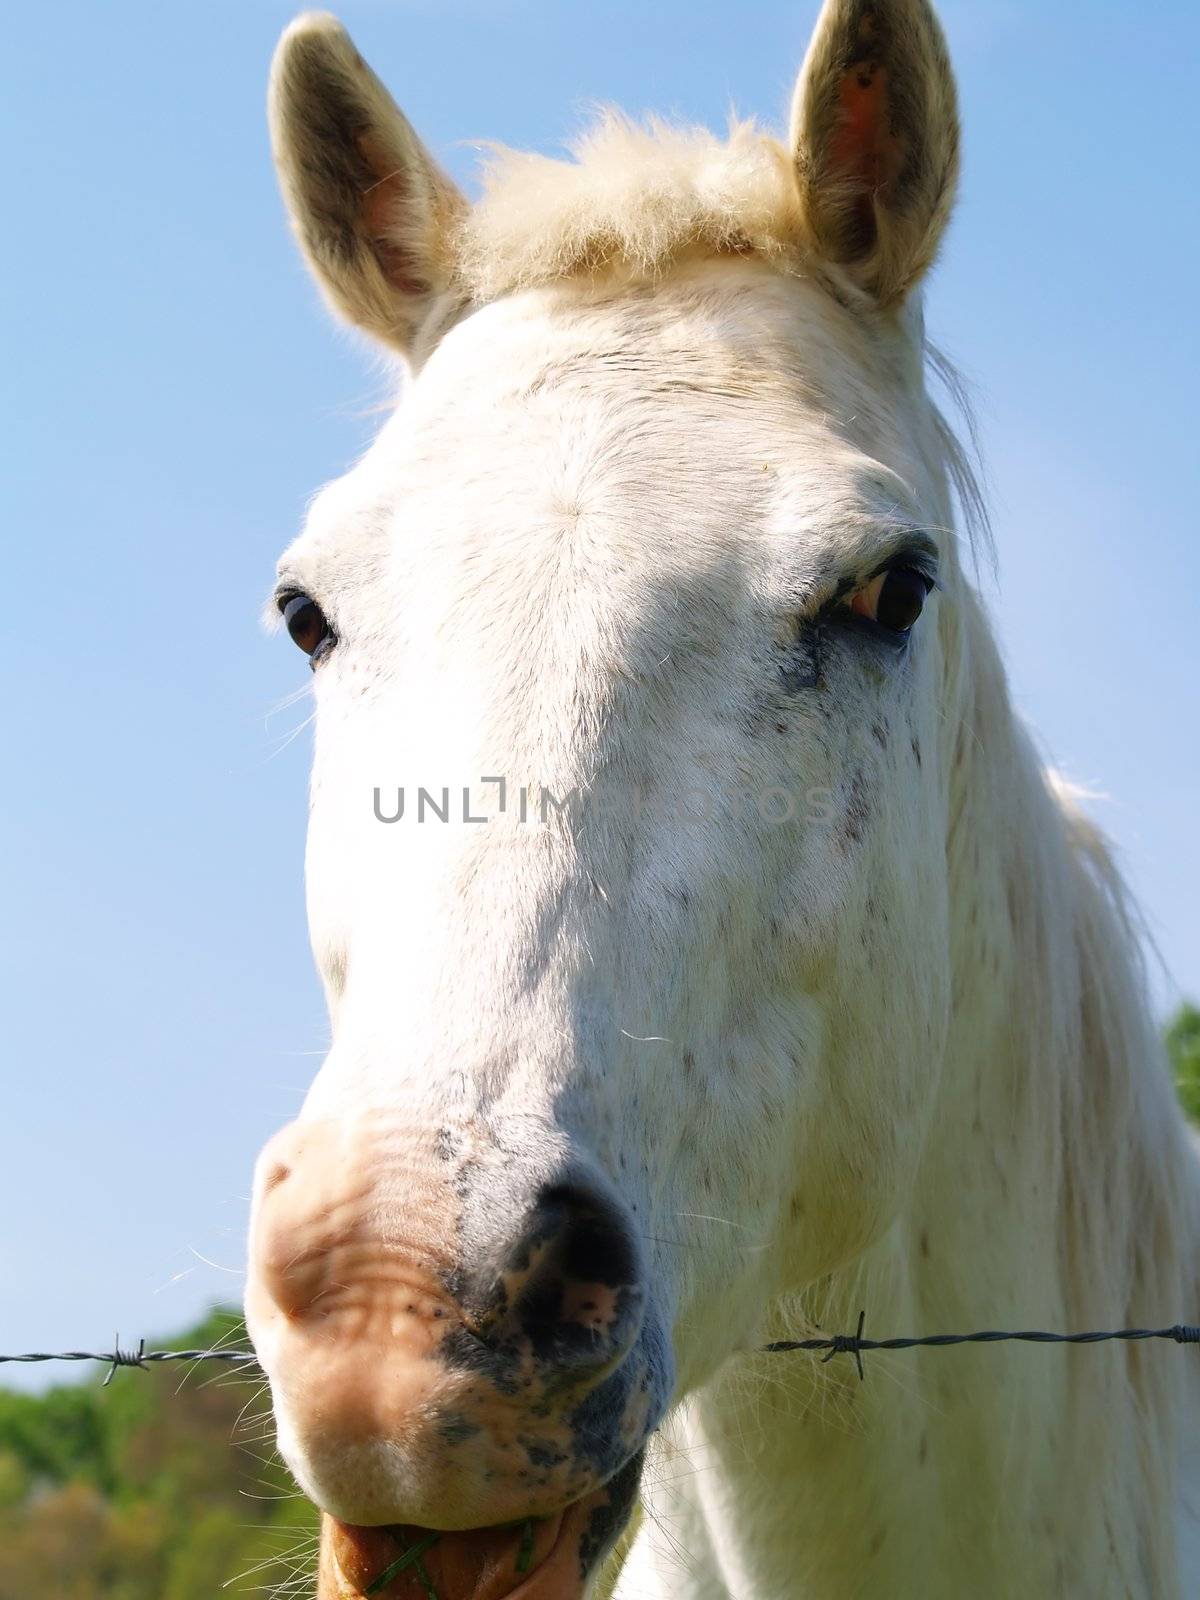 Closeup of a white horse's head over a barbed wire fence